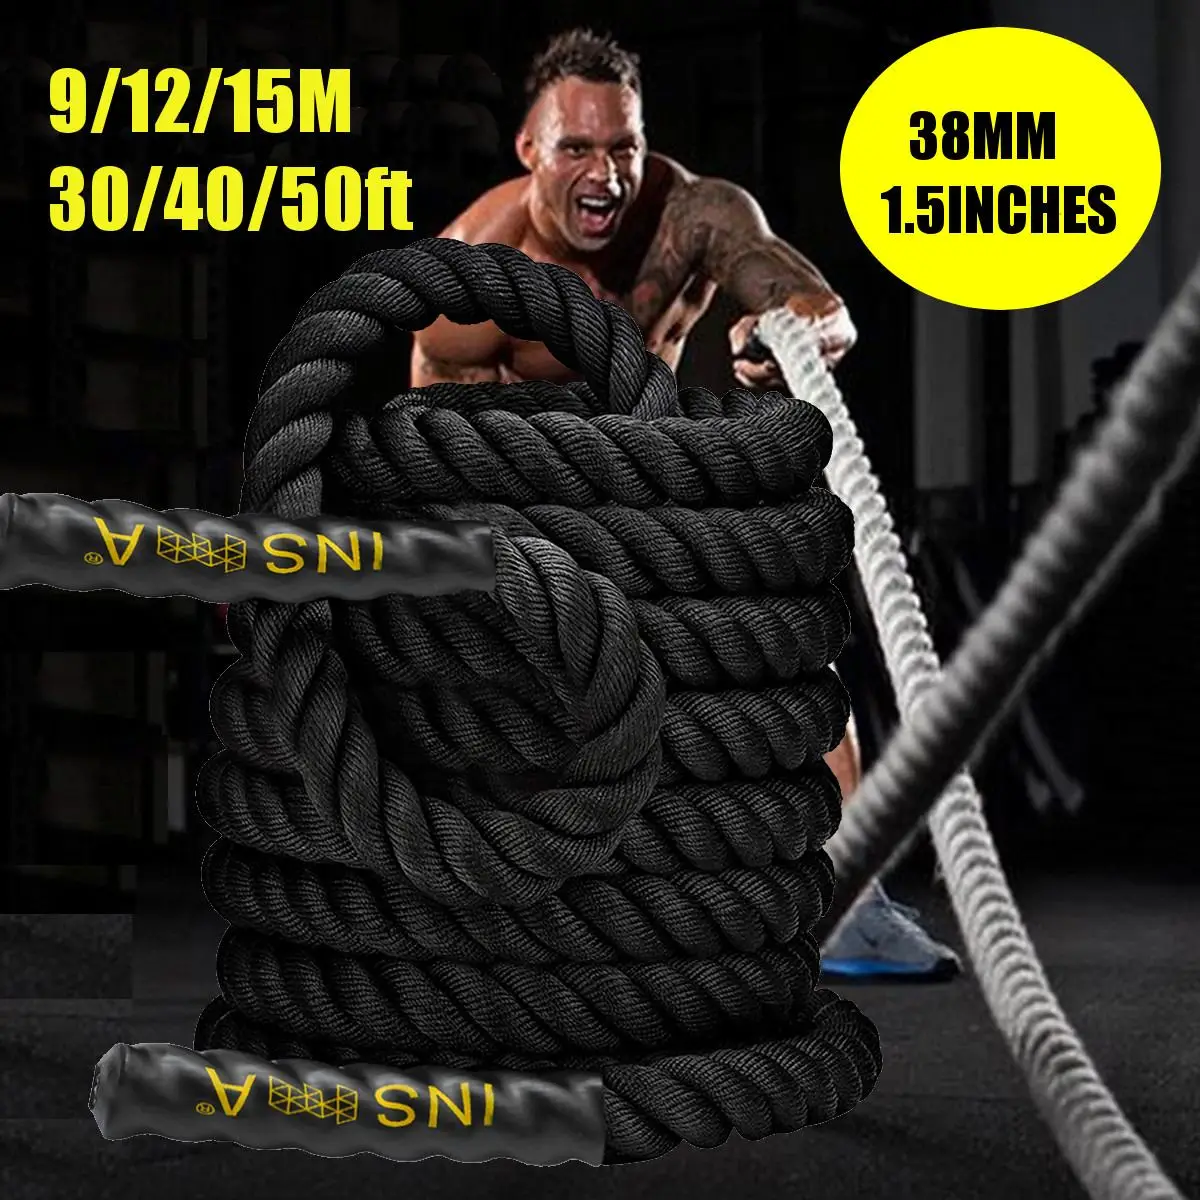 

38mm 9M Battle Power Rope Heavy Jump Rope Strength Muscle Training Fitness Improve Strenght Home Gym Equipment Skipping Ropes